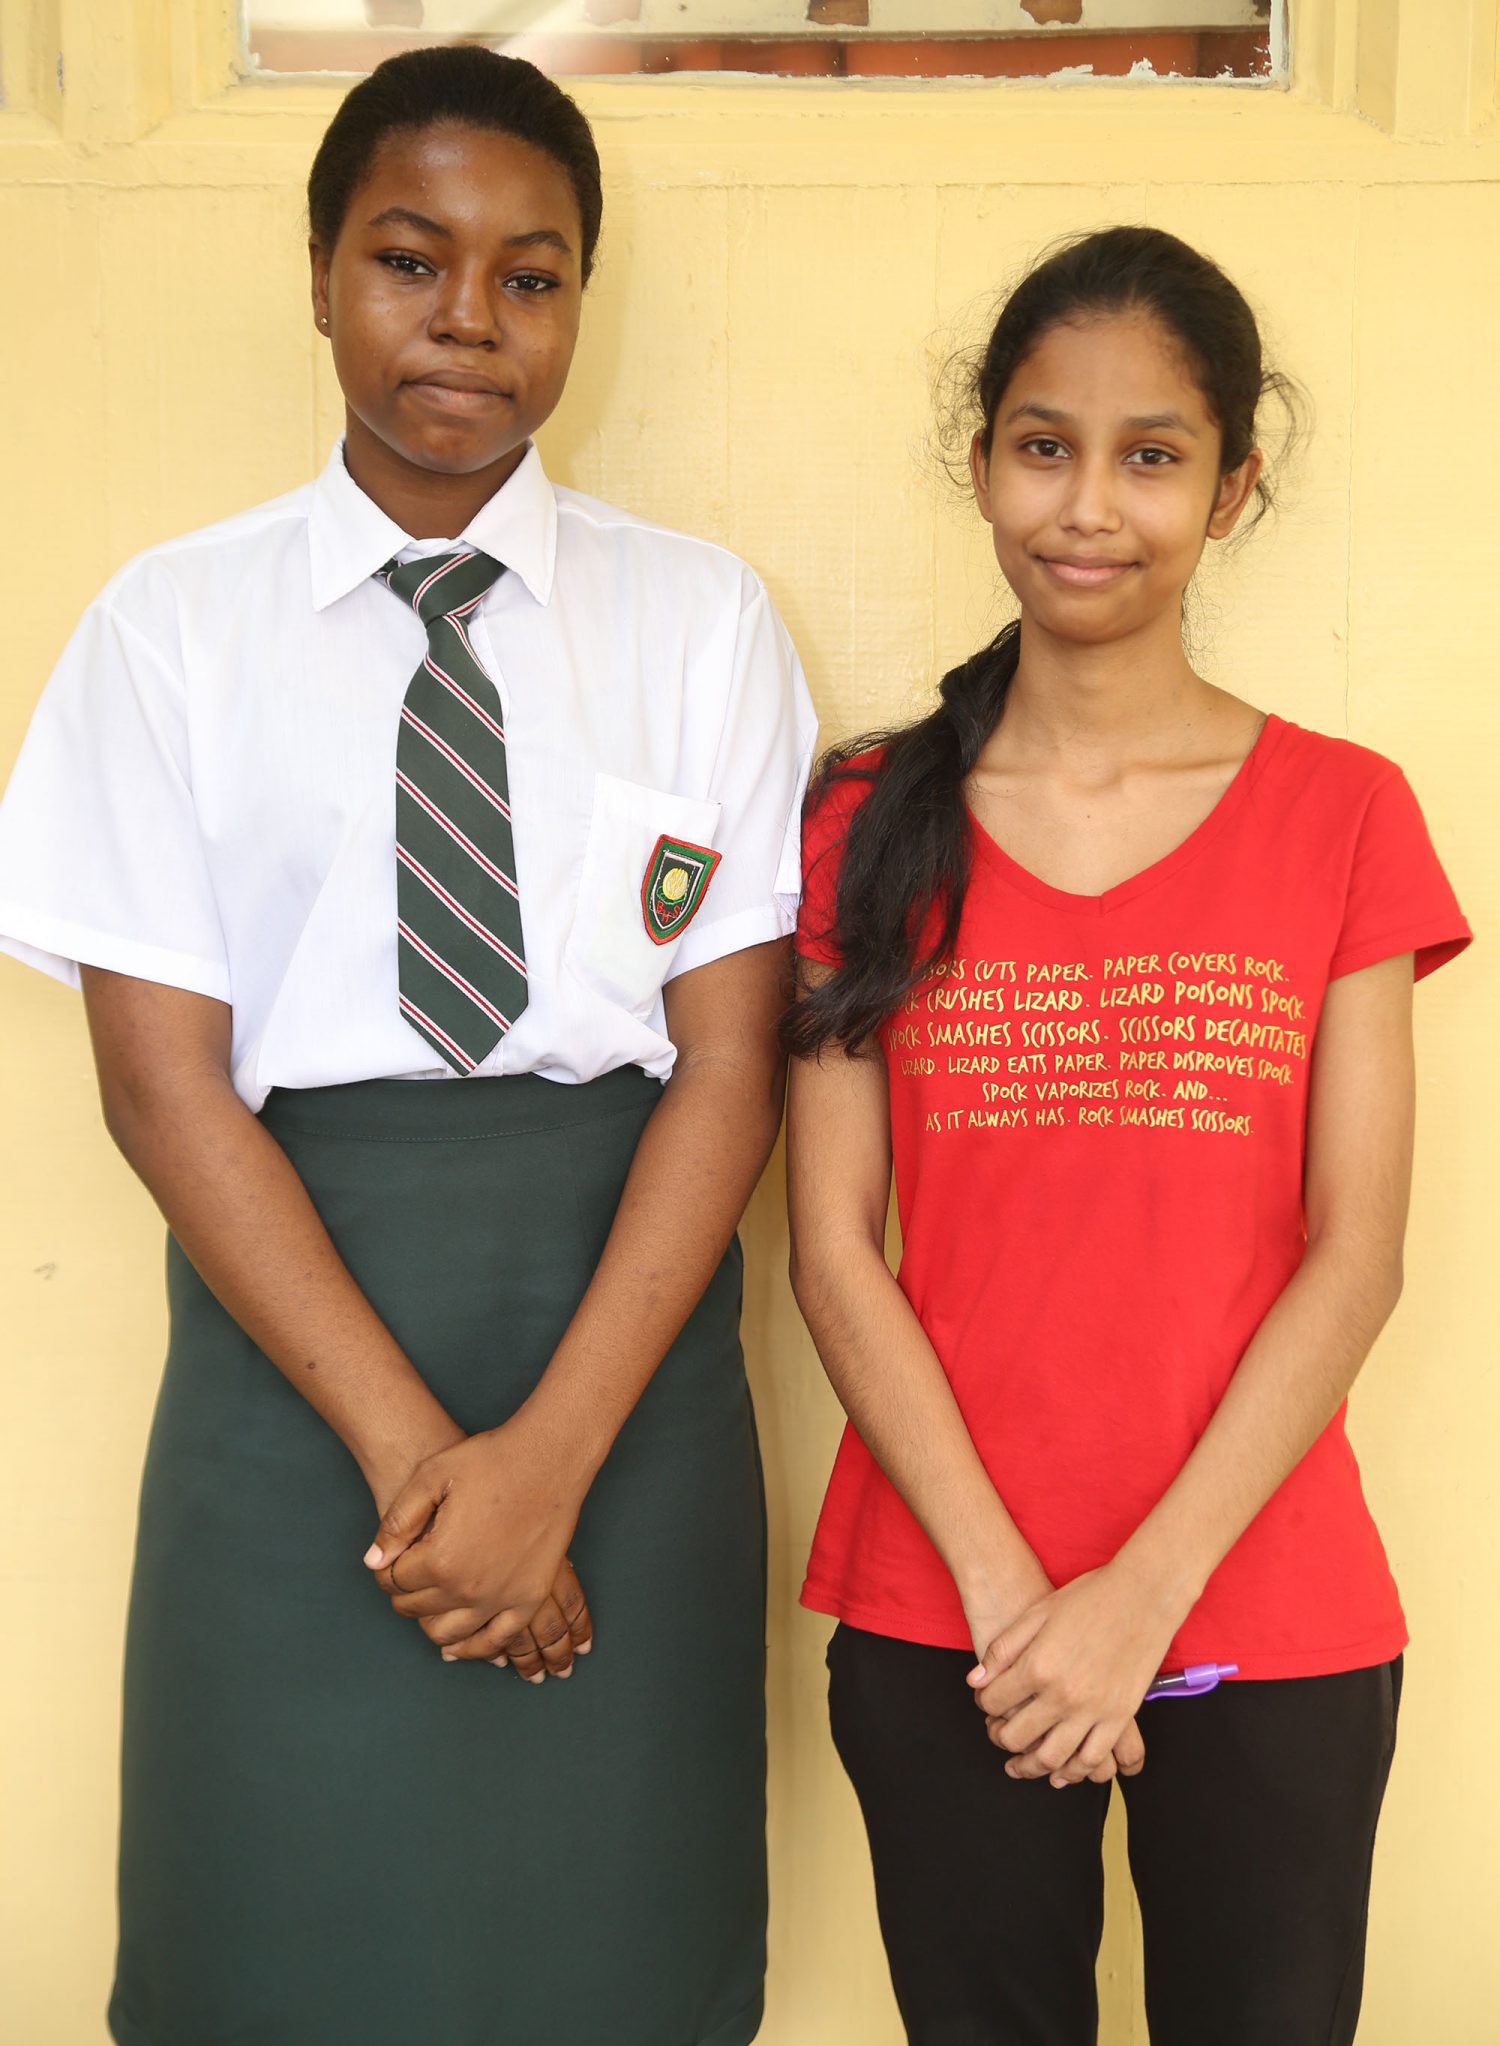 The Bishops’ High School’s top CSEC and top CAPE performers, Sarah Grannum (left) and Carissa Kissoon. (Keno George photo)